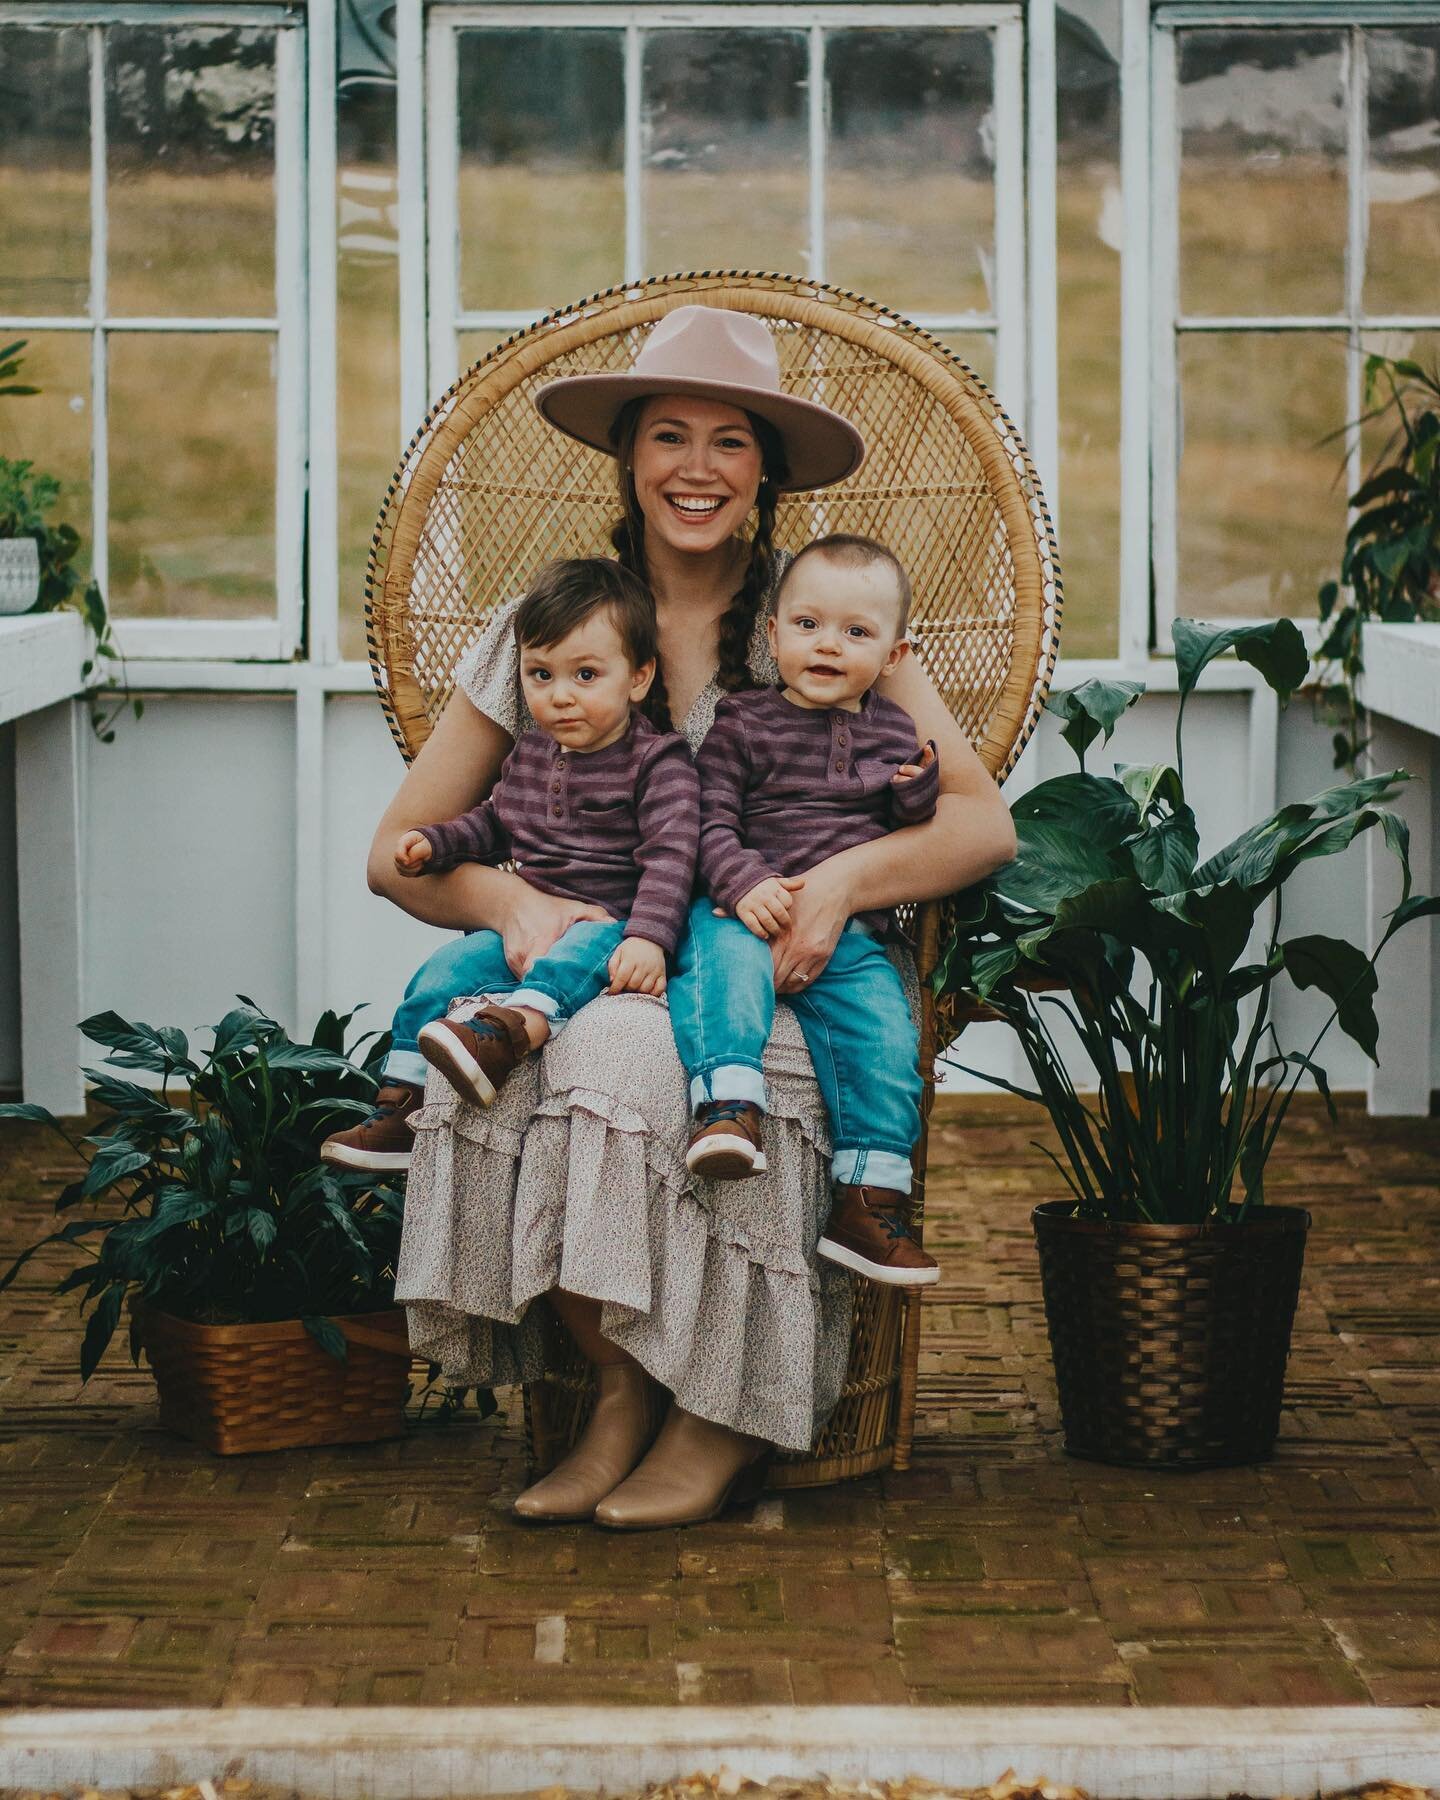 Happy Friday from the greenhouse! 🌱These cuties and I hope you find the time to rest &amp; do something you love this weekend! Over here we will be sharing lots of giggles &amp; snuggles, starting more seeds, prepping for the Easter Bunny event and 